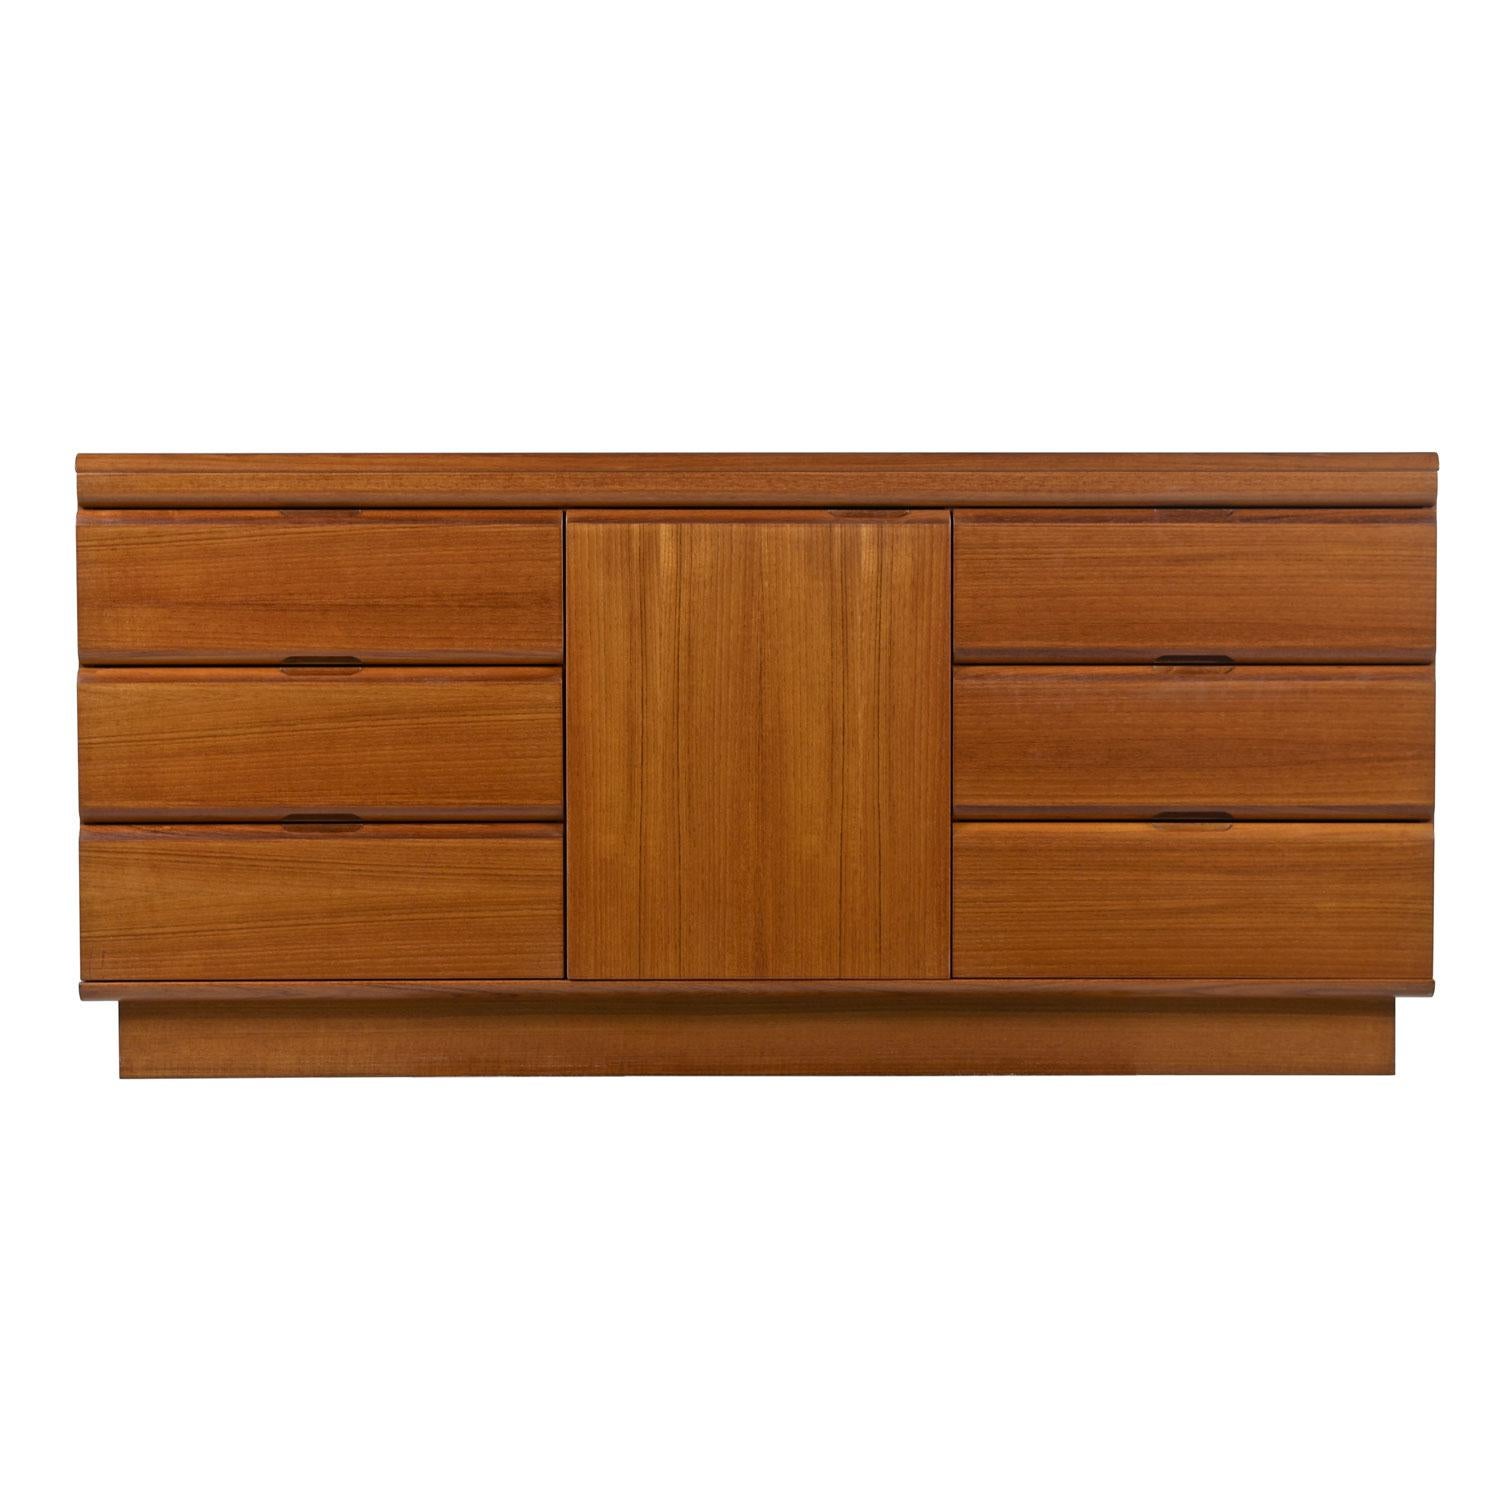 Gorgeous teak Danish modern dresser or credenza by Sun Cabinet. Beautifully crafted with remarkable construction. Sturdy, heavy, rigid and straight. The drawers and cabinet door open and close with ease on metal glides and hinges. Cleverly hidden